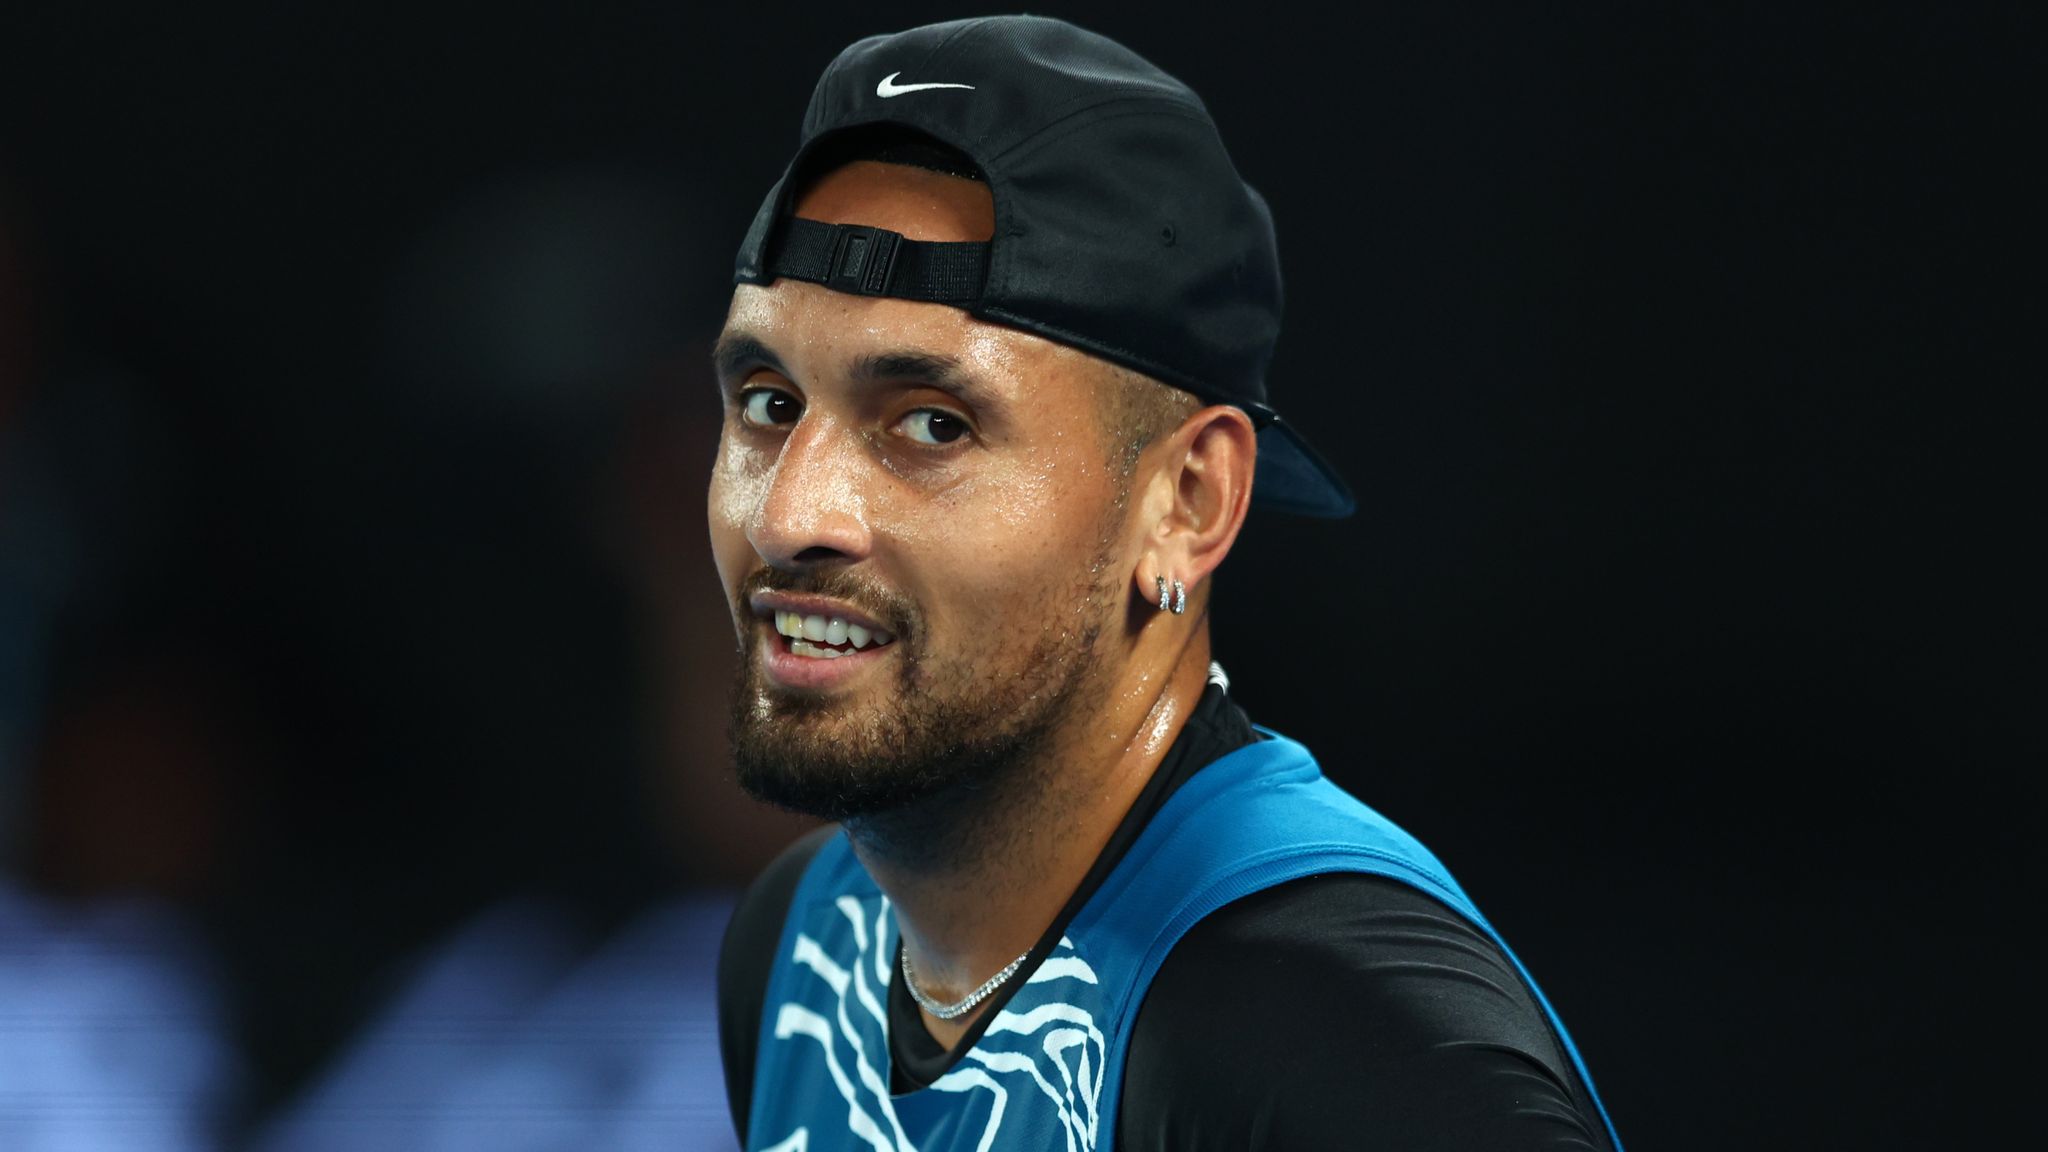 Nick Kyrgios would retire immediately if he was to win his first Grand Slam with the Australian Open starting on Monday Tennis News Sky Sports